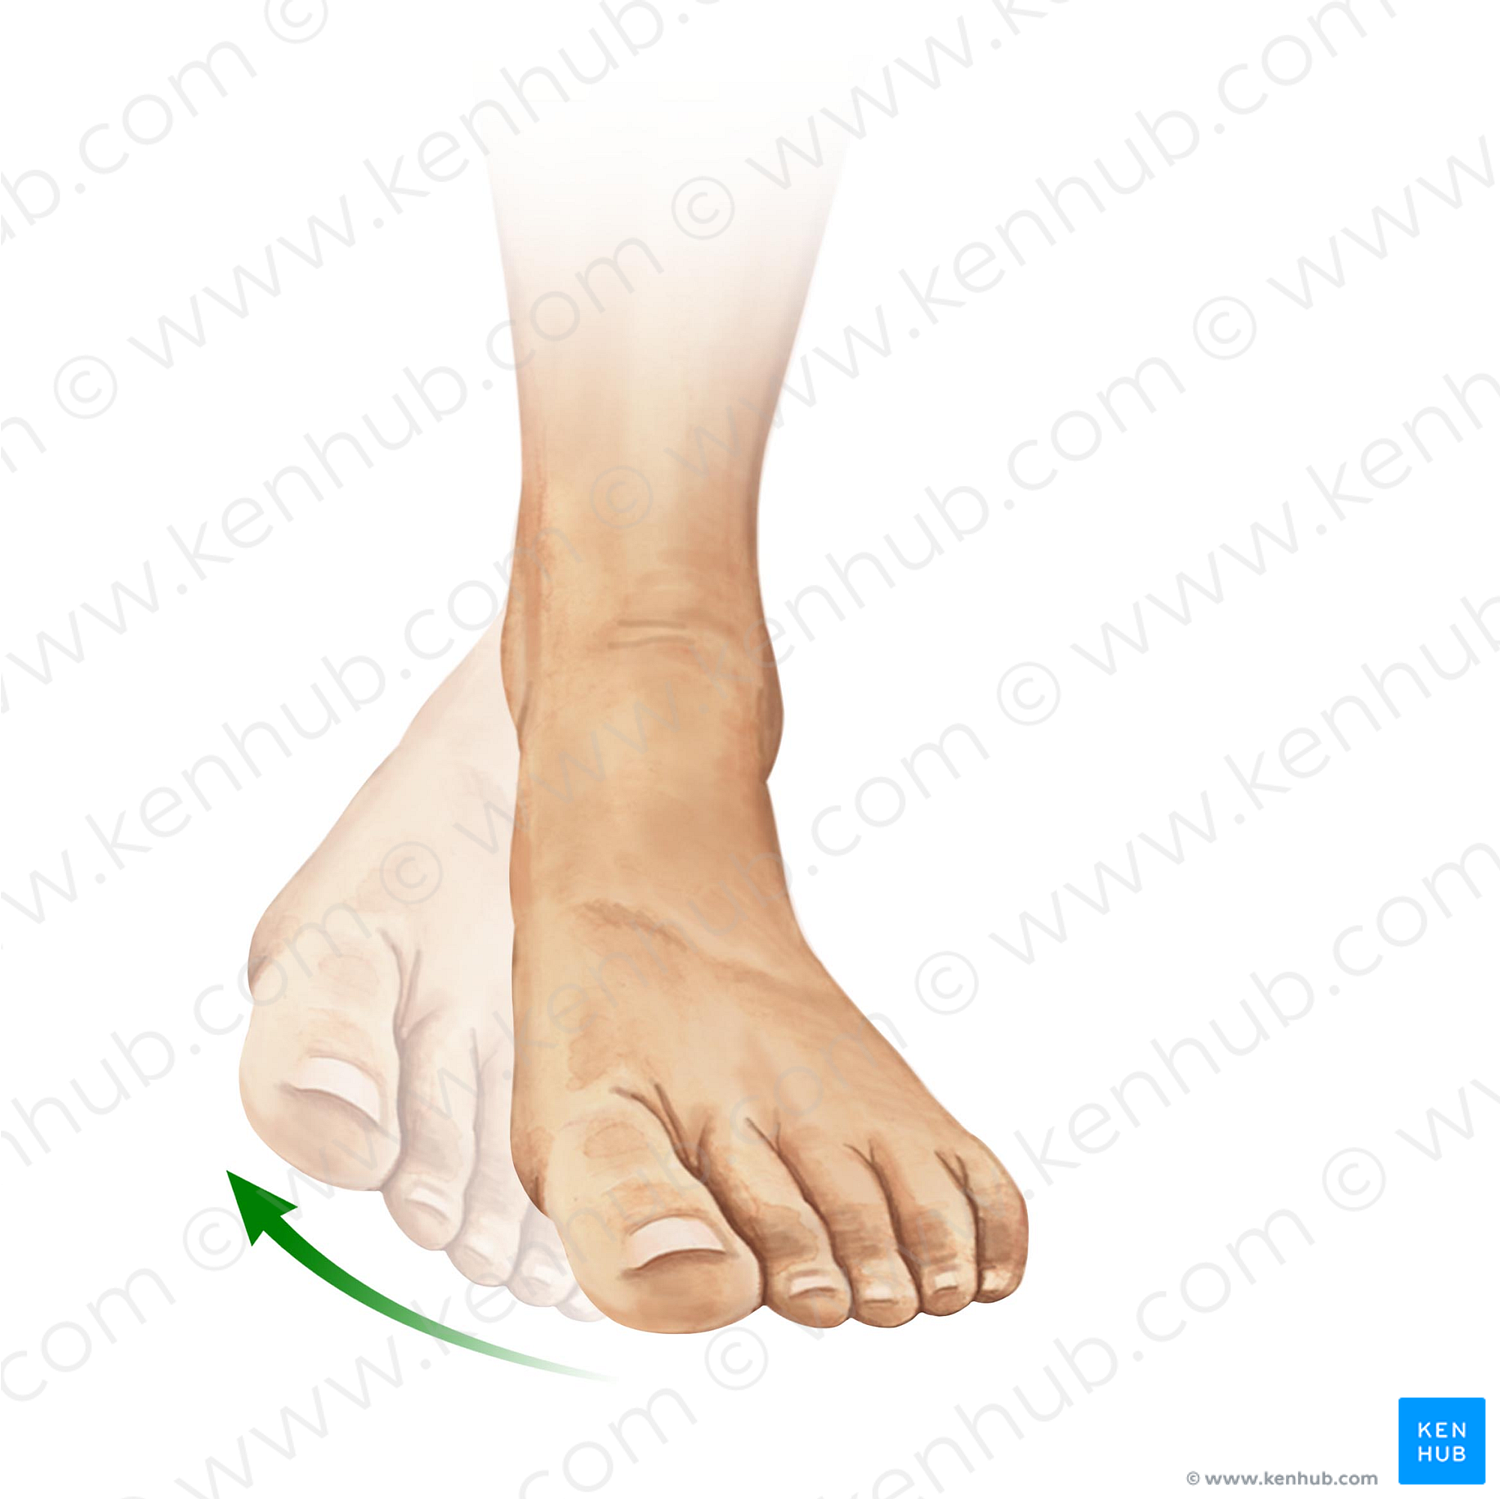 Inversion of foot (#11022)